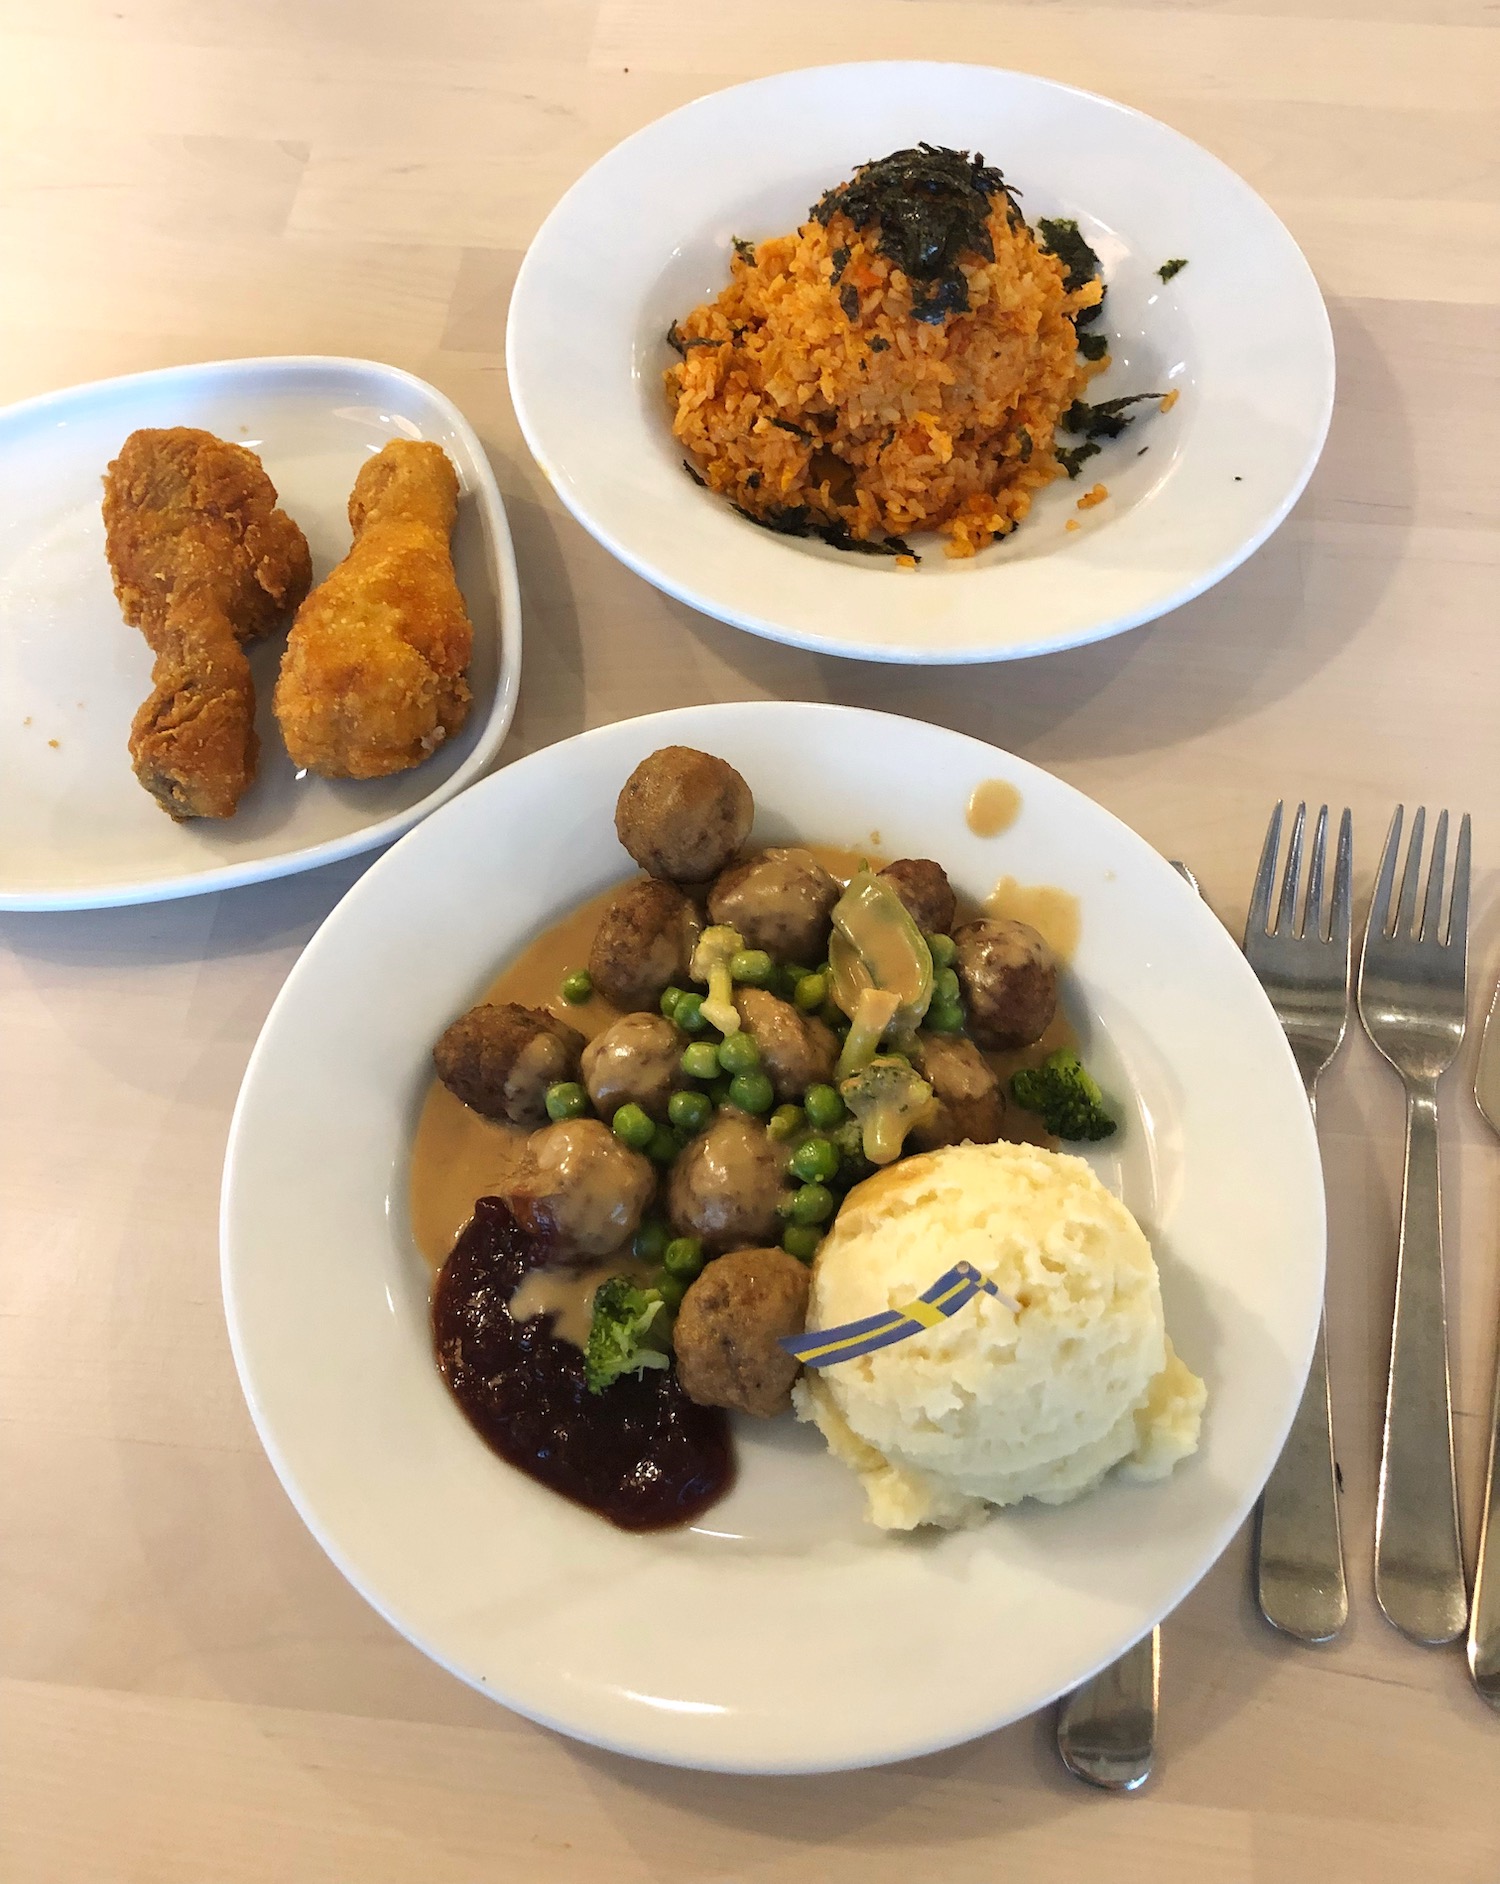 Kimchi Rice as a side dish served at IKEA in South Korea